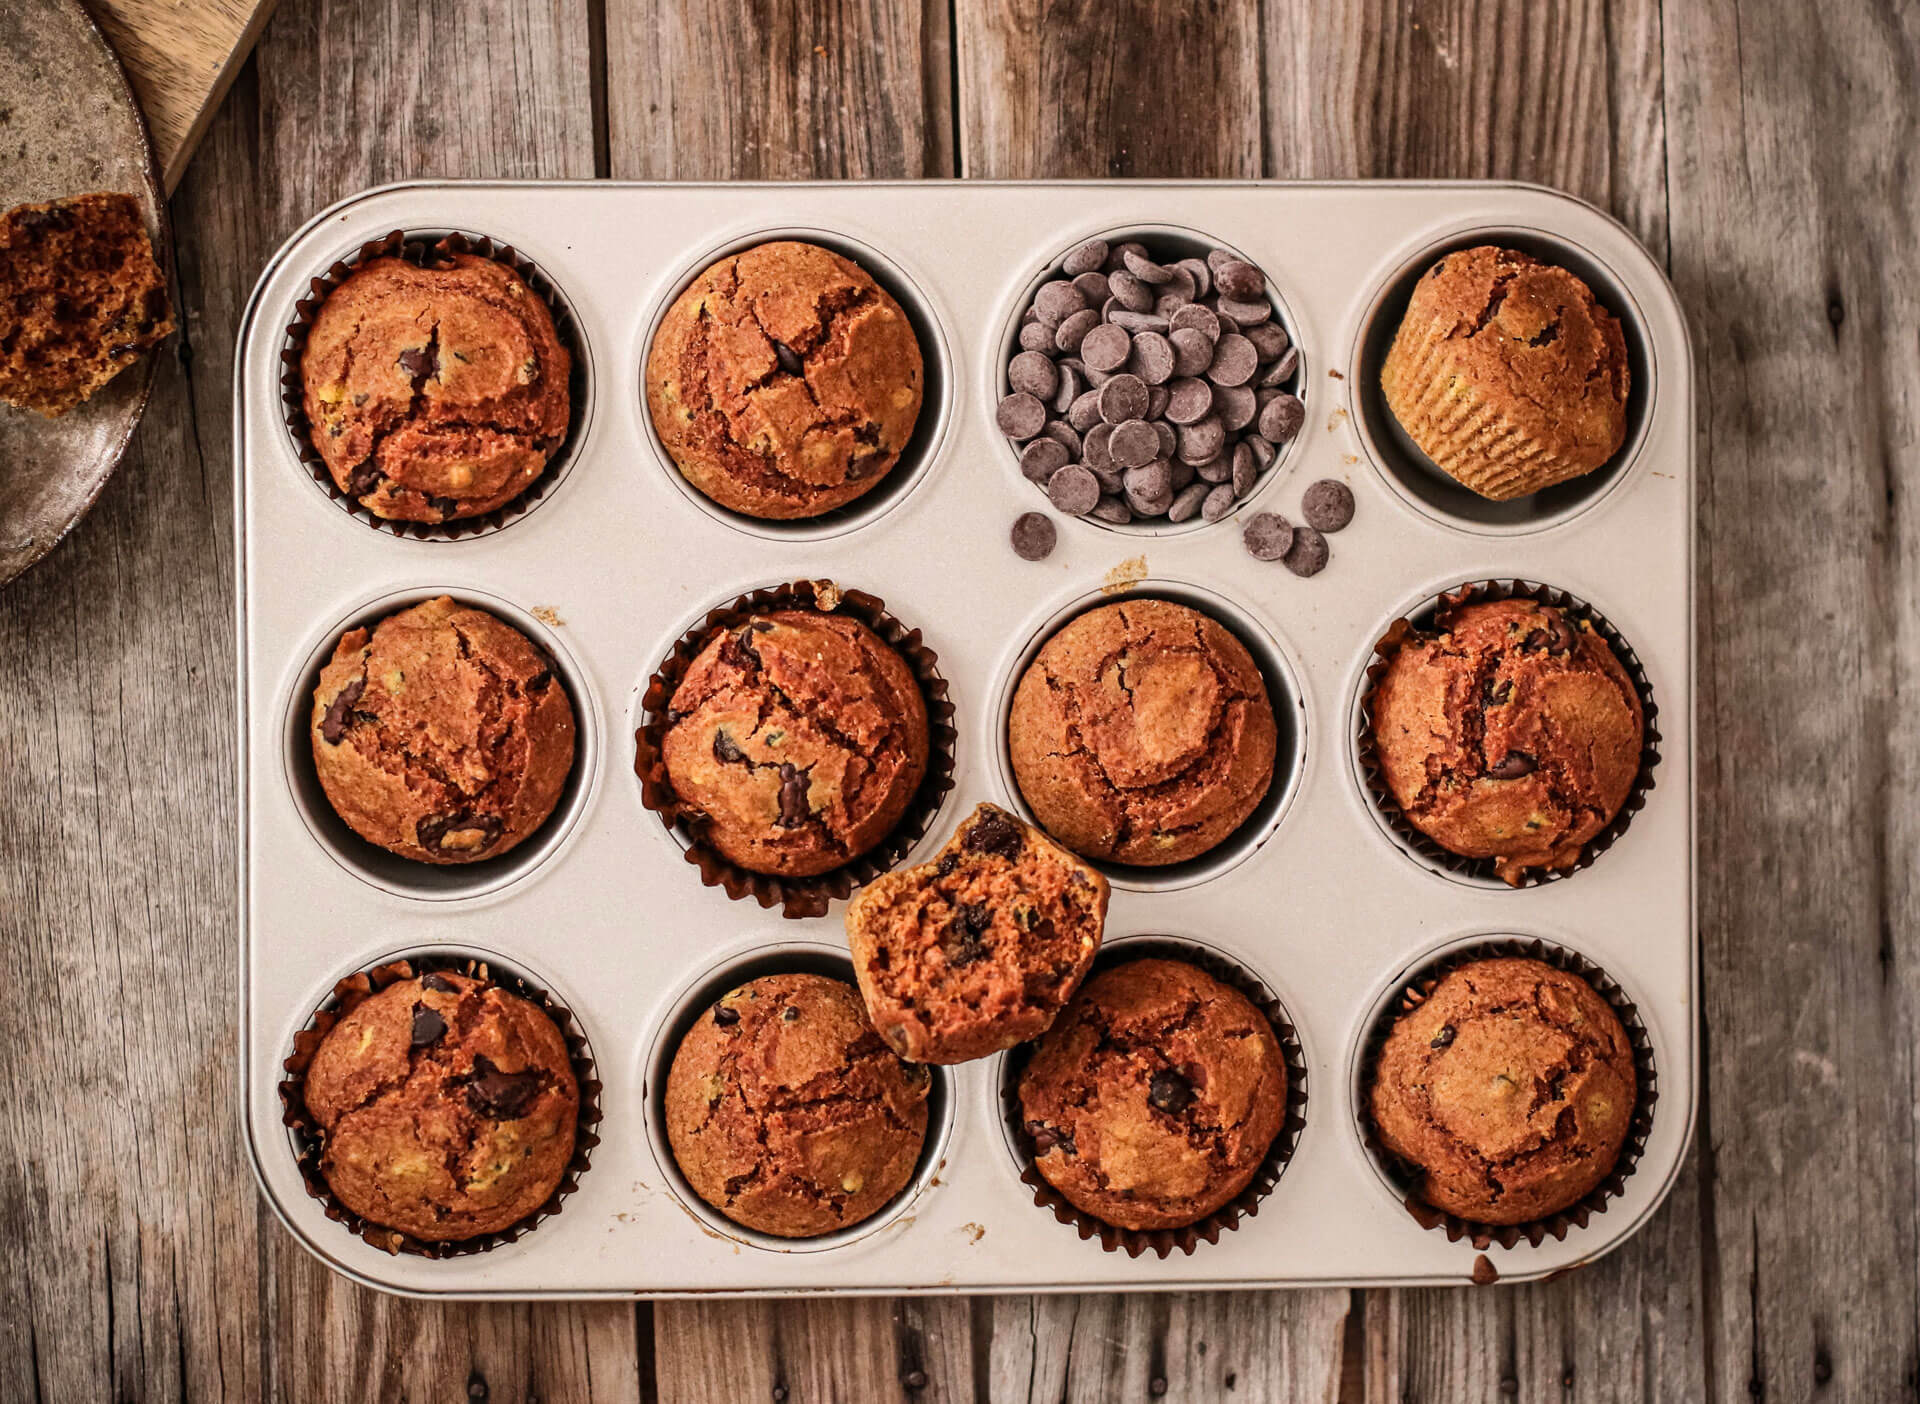 Lemon and Chocolate Chips Muffins